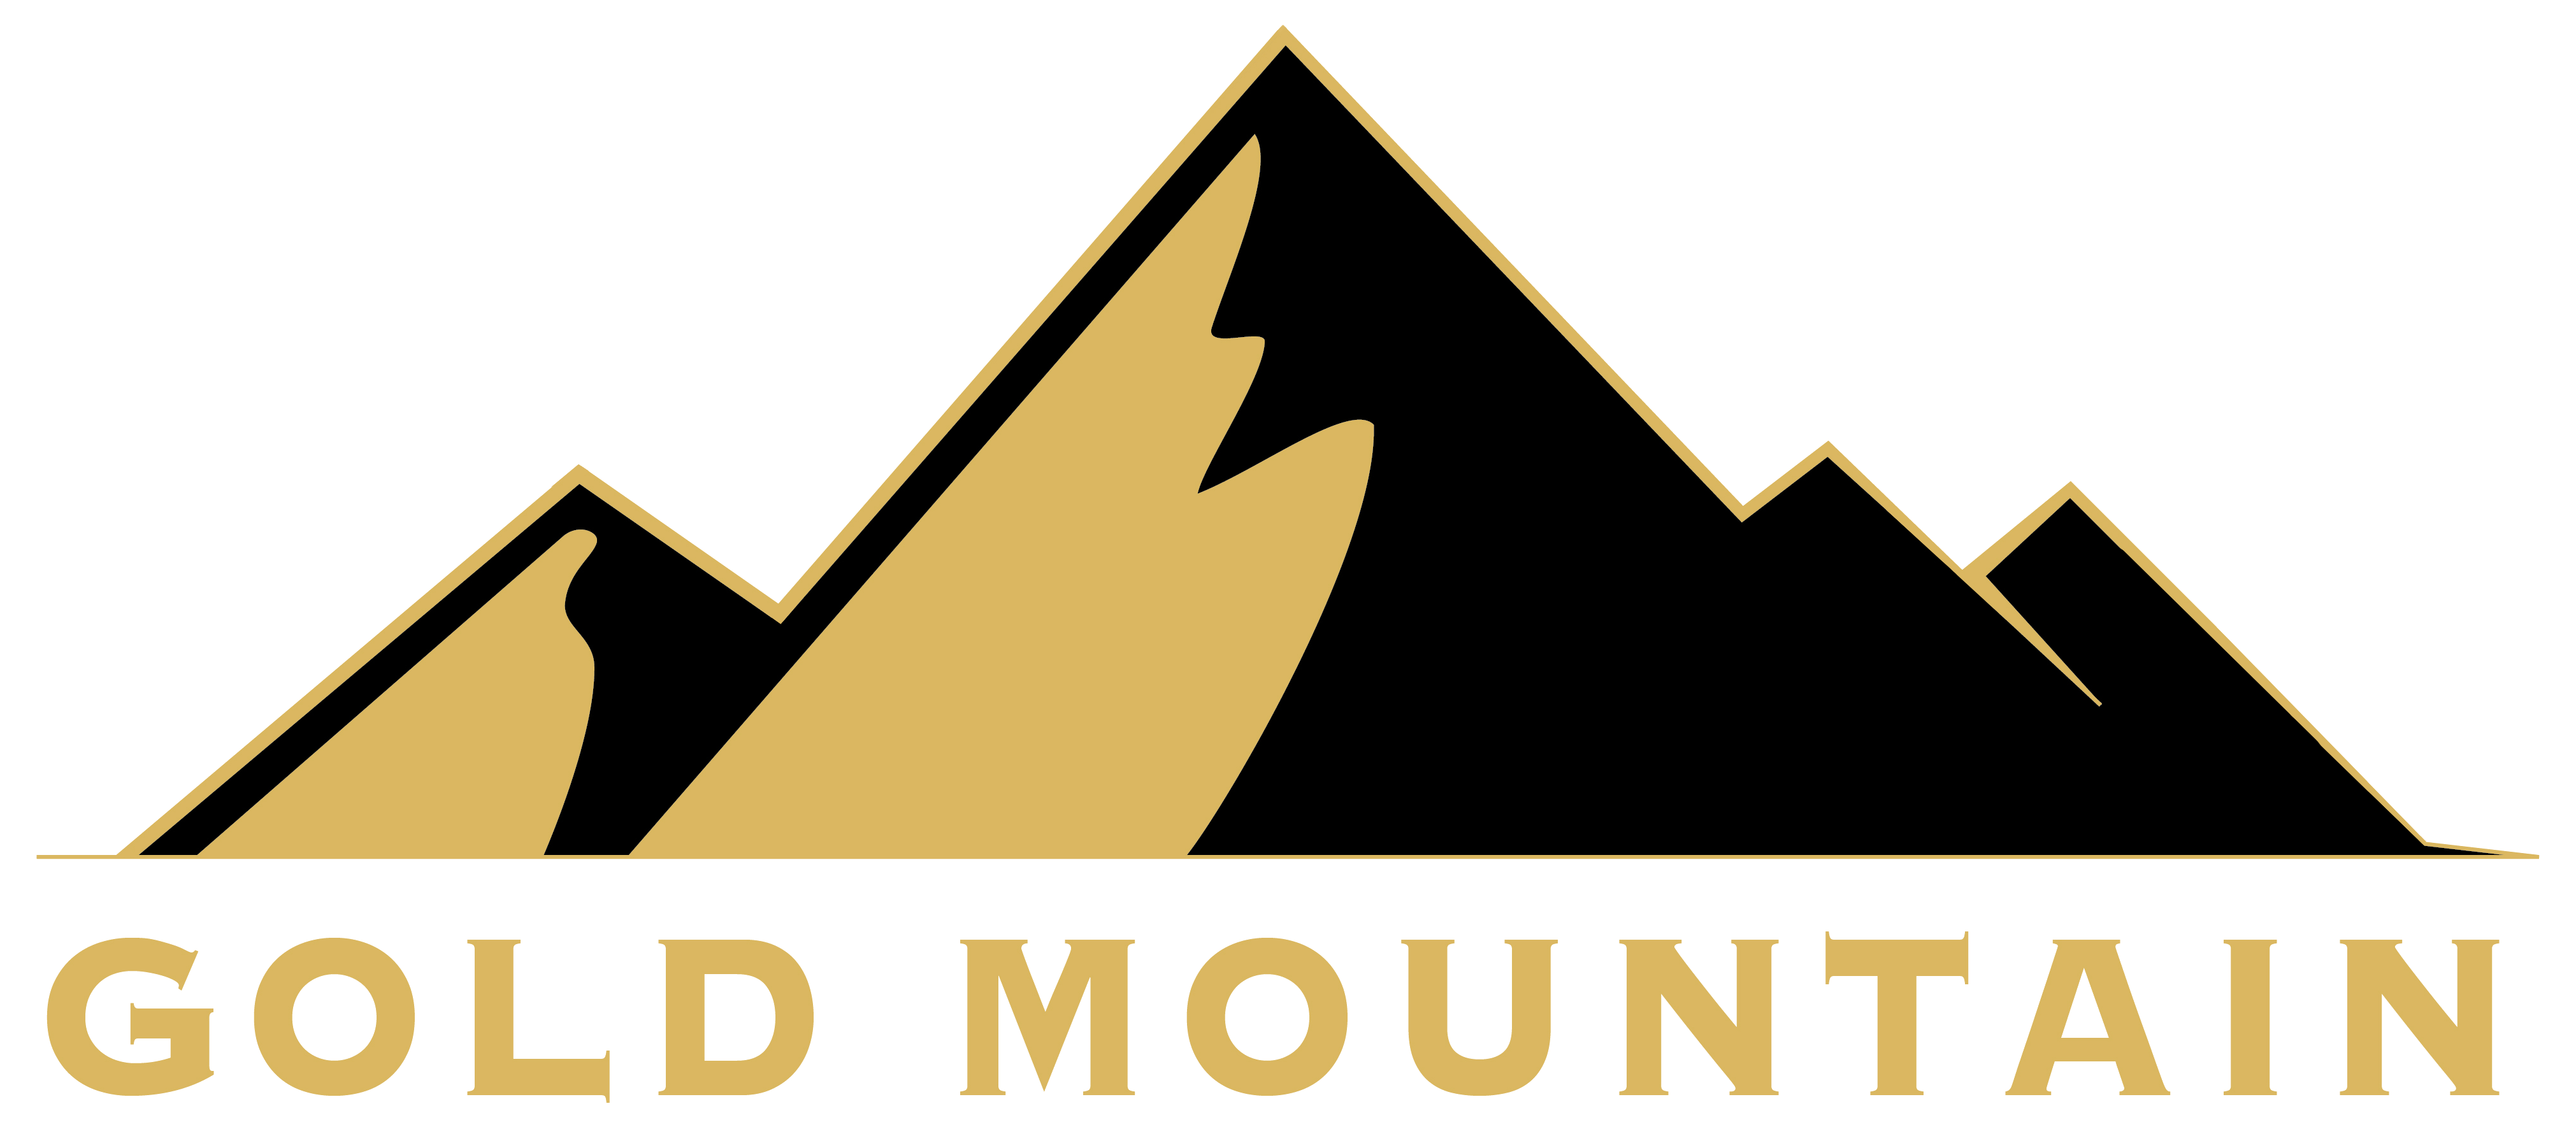 Gold Mountain Mining Corp., Monday, February 8, 2021, Press release picture